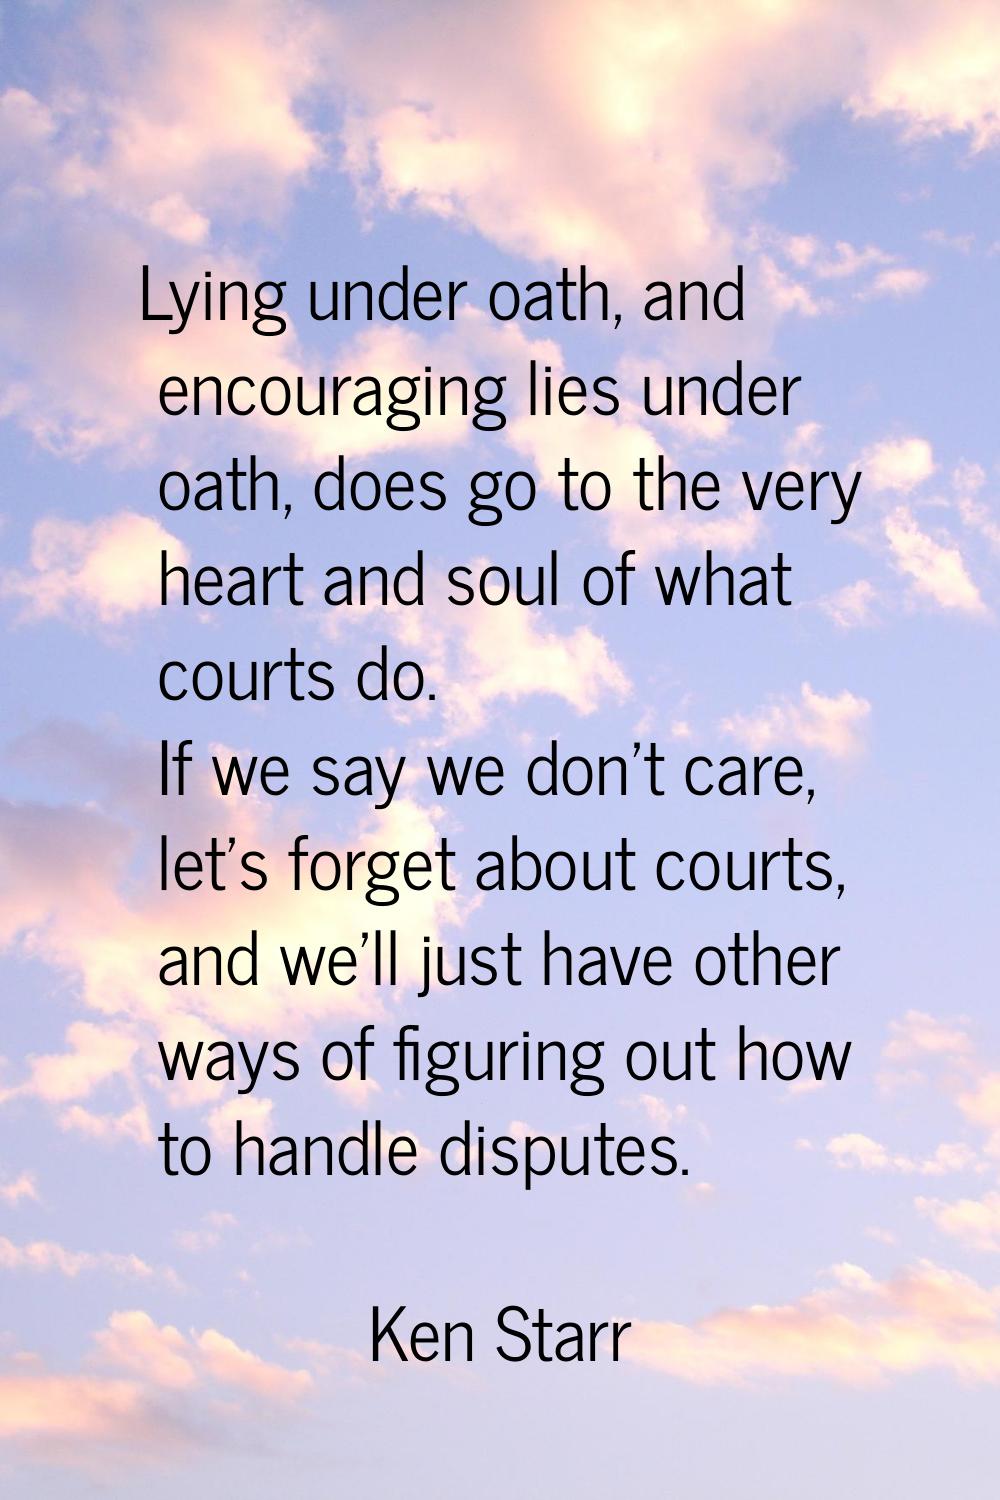 Lying under oath, and encouraging lies under oath, does go to the very heart and soul of what court